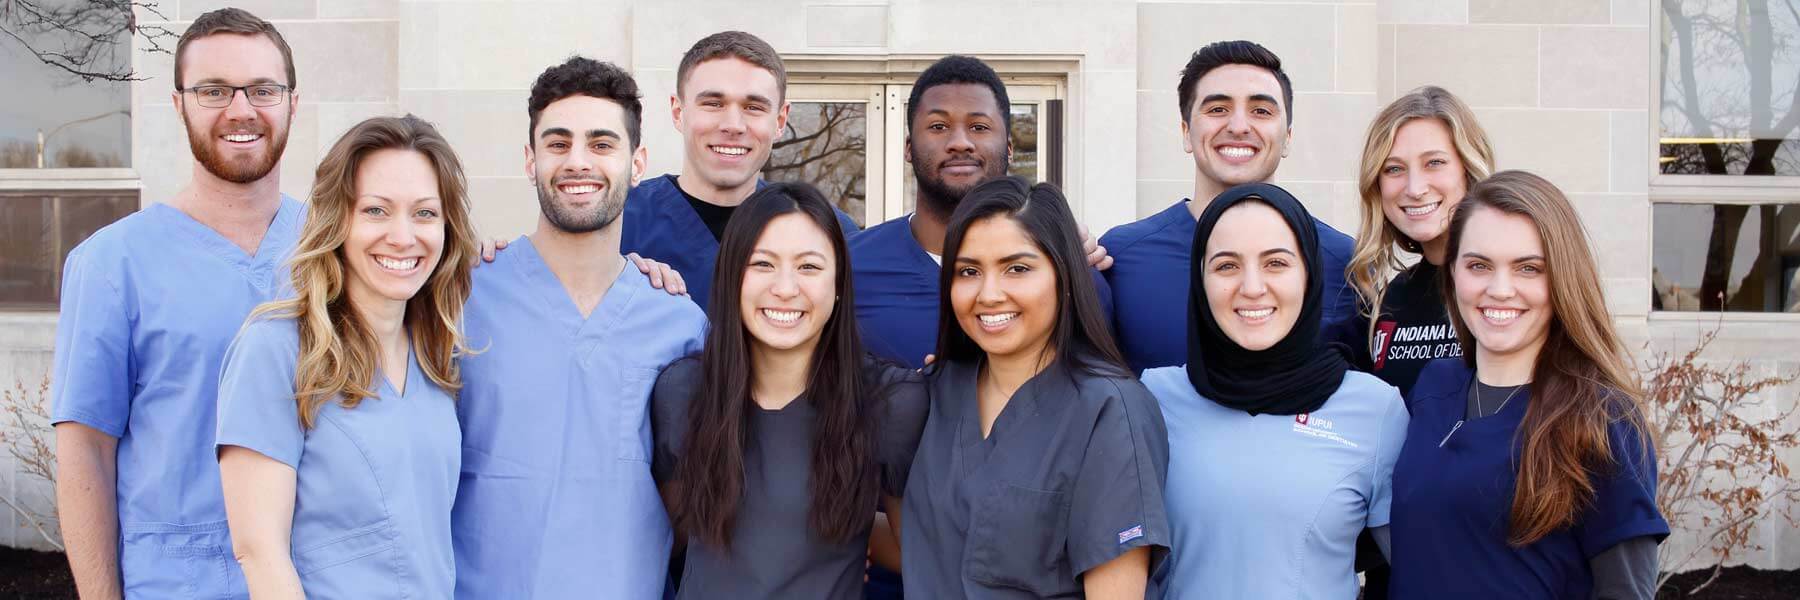 Dentistry students pose together and smile in their scrubs. 